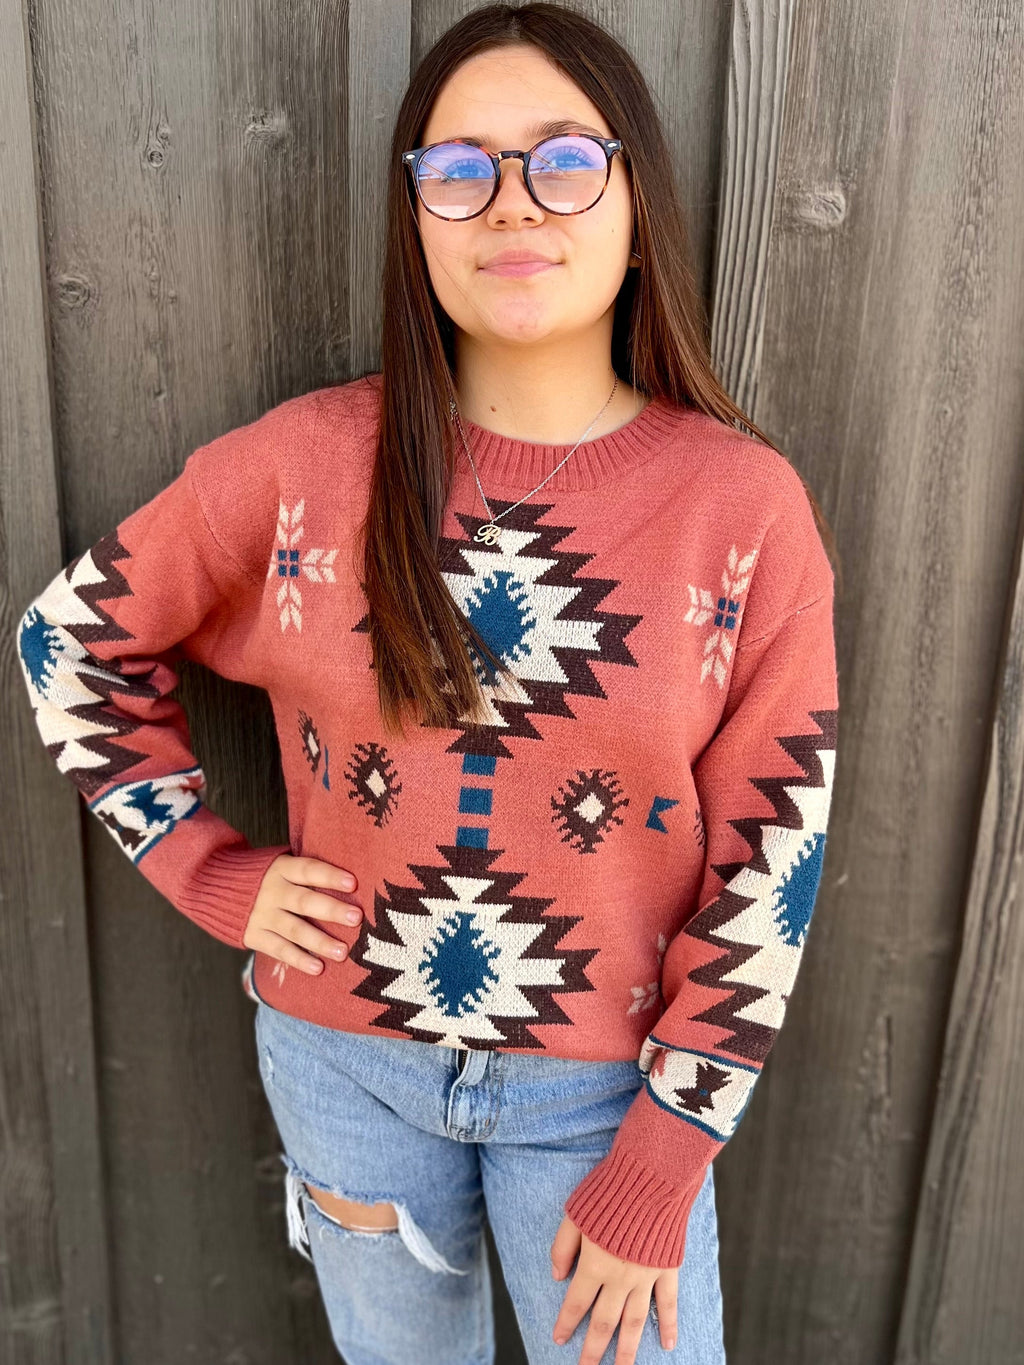 Wrap yourself up in warmth and style with this cozy Pink Southwestern Sweater. Crafted from the softest material, this sweater is sure to keep you warm and cozy all season long while drawing admiring eyes with its eye-catching Pink Aztec Pattern. Be ready to take on the day with this beautiful piece of fashion!  True to size   42% Acrylic 30% Polyester 28% Nylon